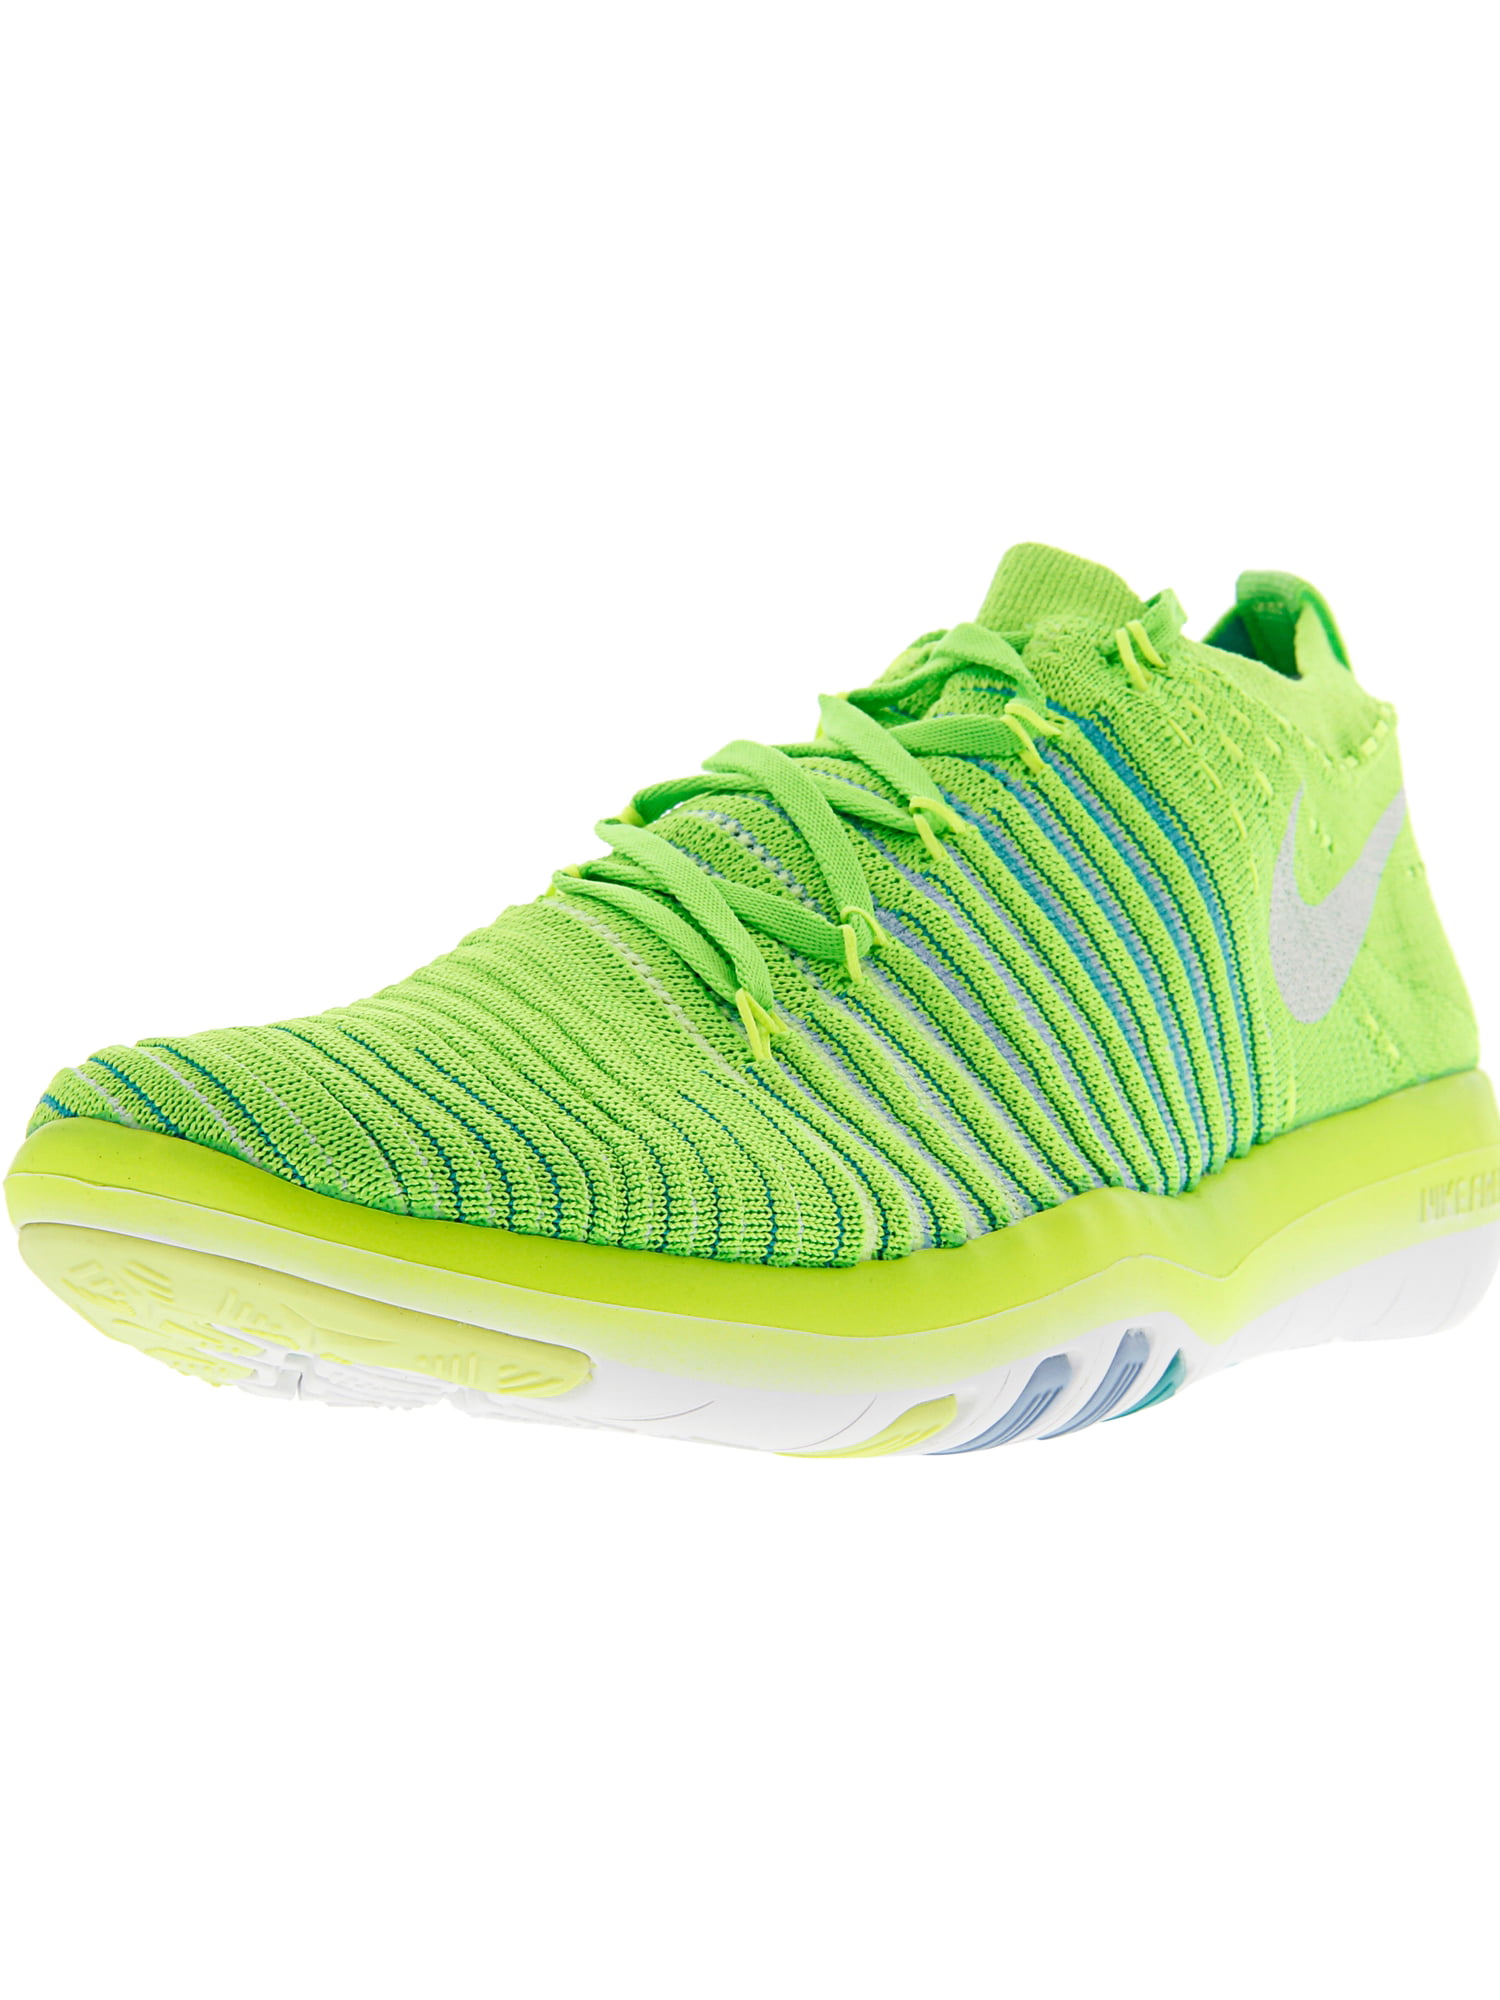 New Light Flyknit Shoes Light Sports Transform Running Shoes For Kids